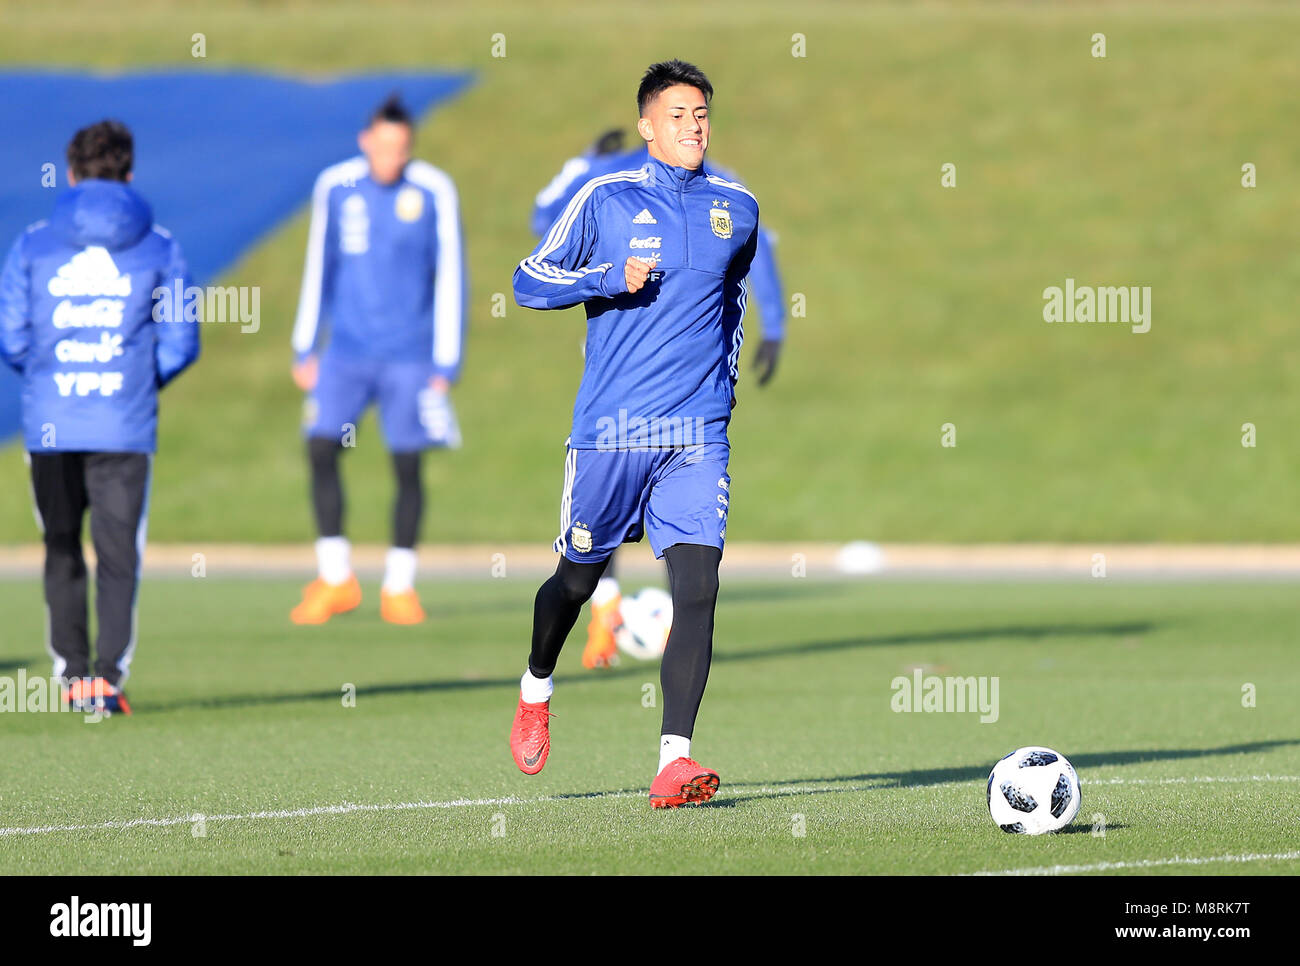 Argentina's Maximiliano Meza during a training session at the City Football Academy, Manchester. PRESS ASSOCIATION Photo. Picture date: Monday March 19, 2018. See PA story SOCCER Argentina. Photo credit should read: Simon Cooper/PA Wire Stock Photo